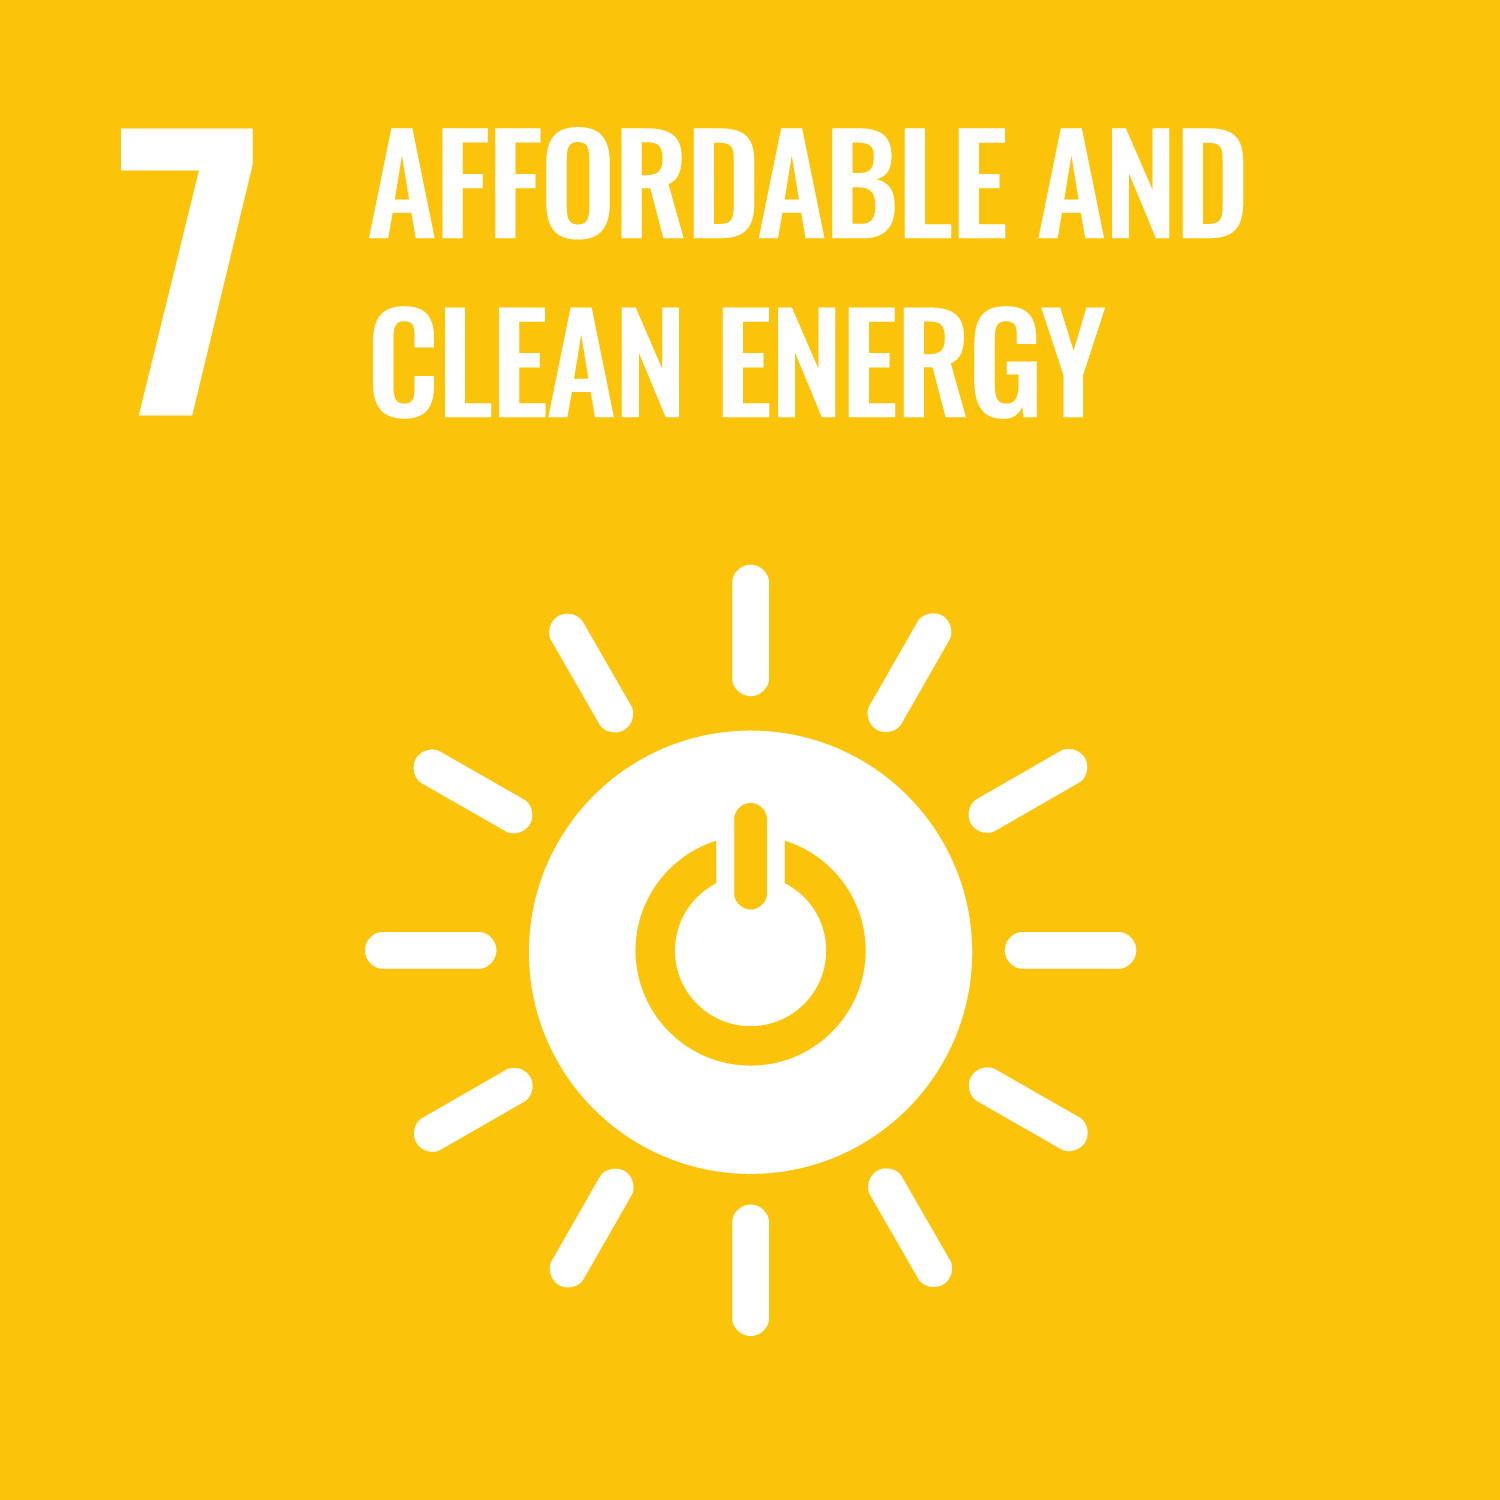 UNs Sustainable Development Goal 7 Affordable and clean energy. Link to UNs Sustainable development goal number 7